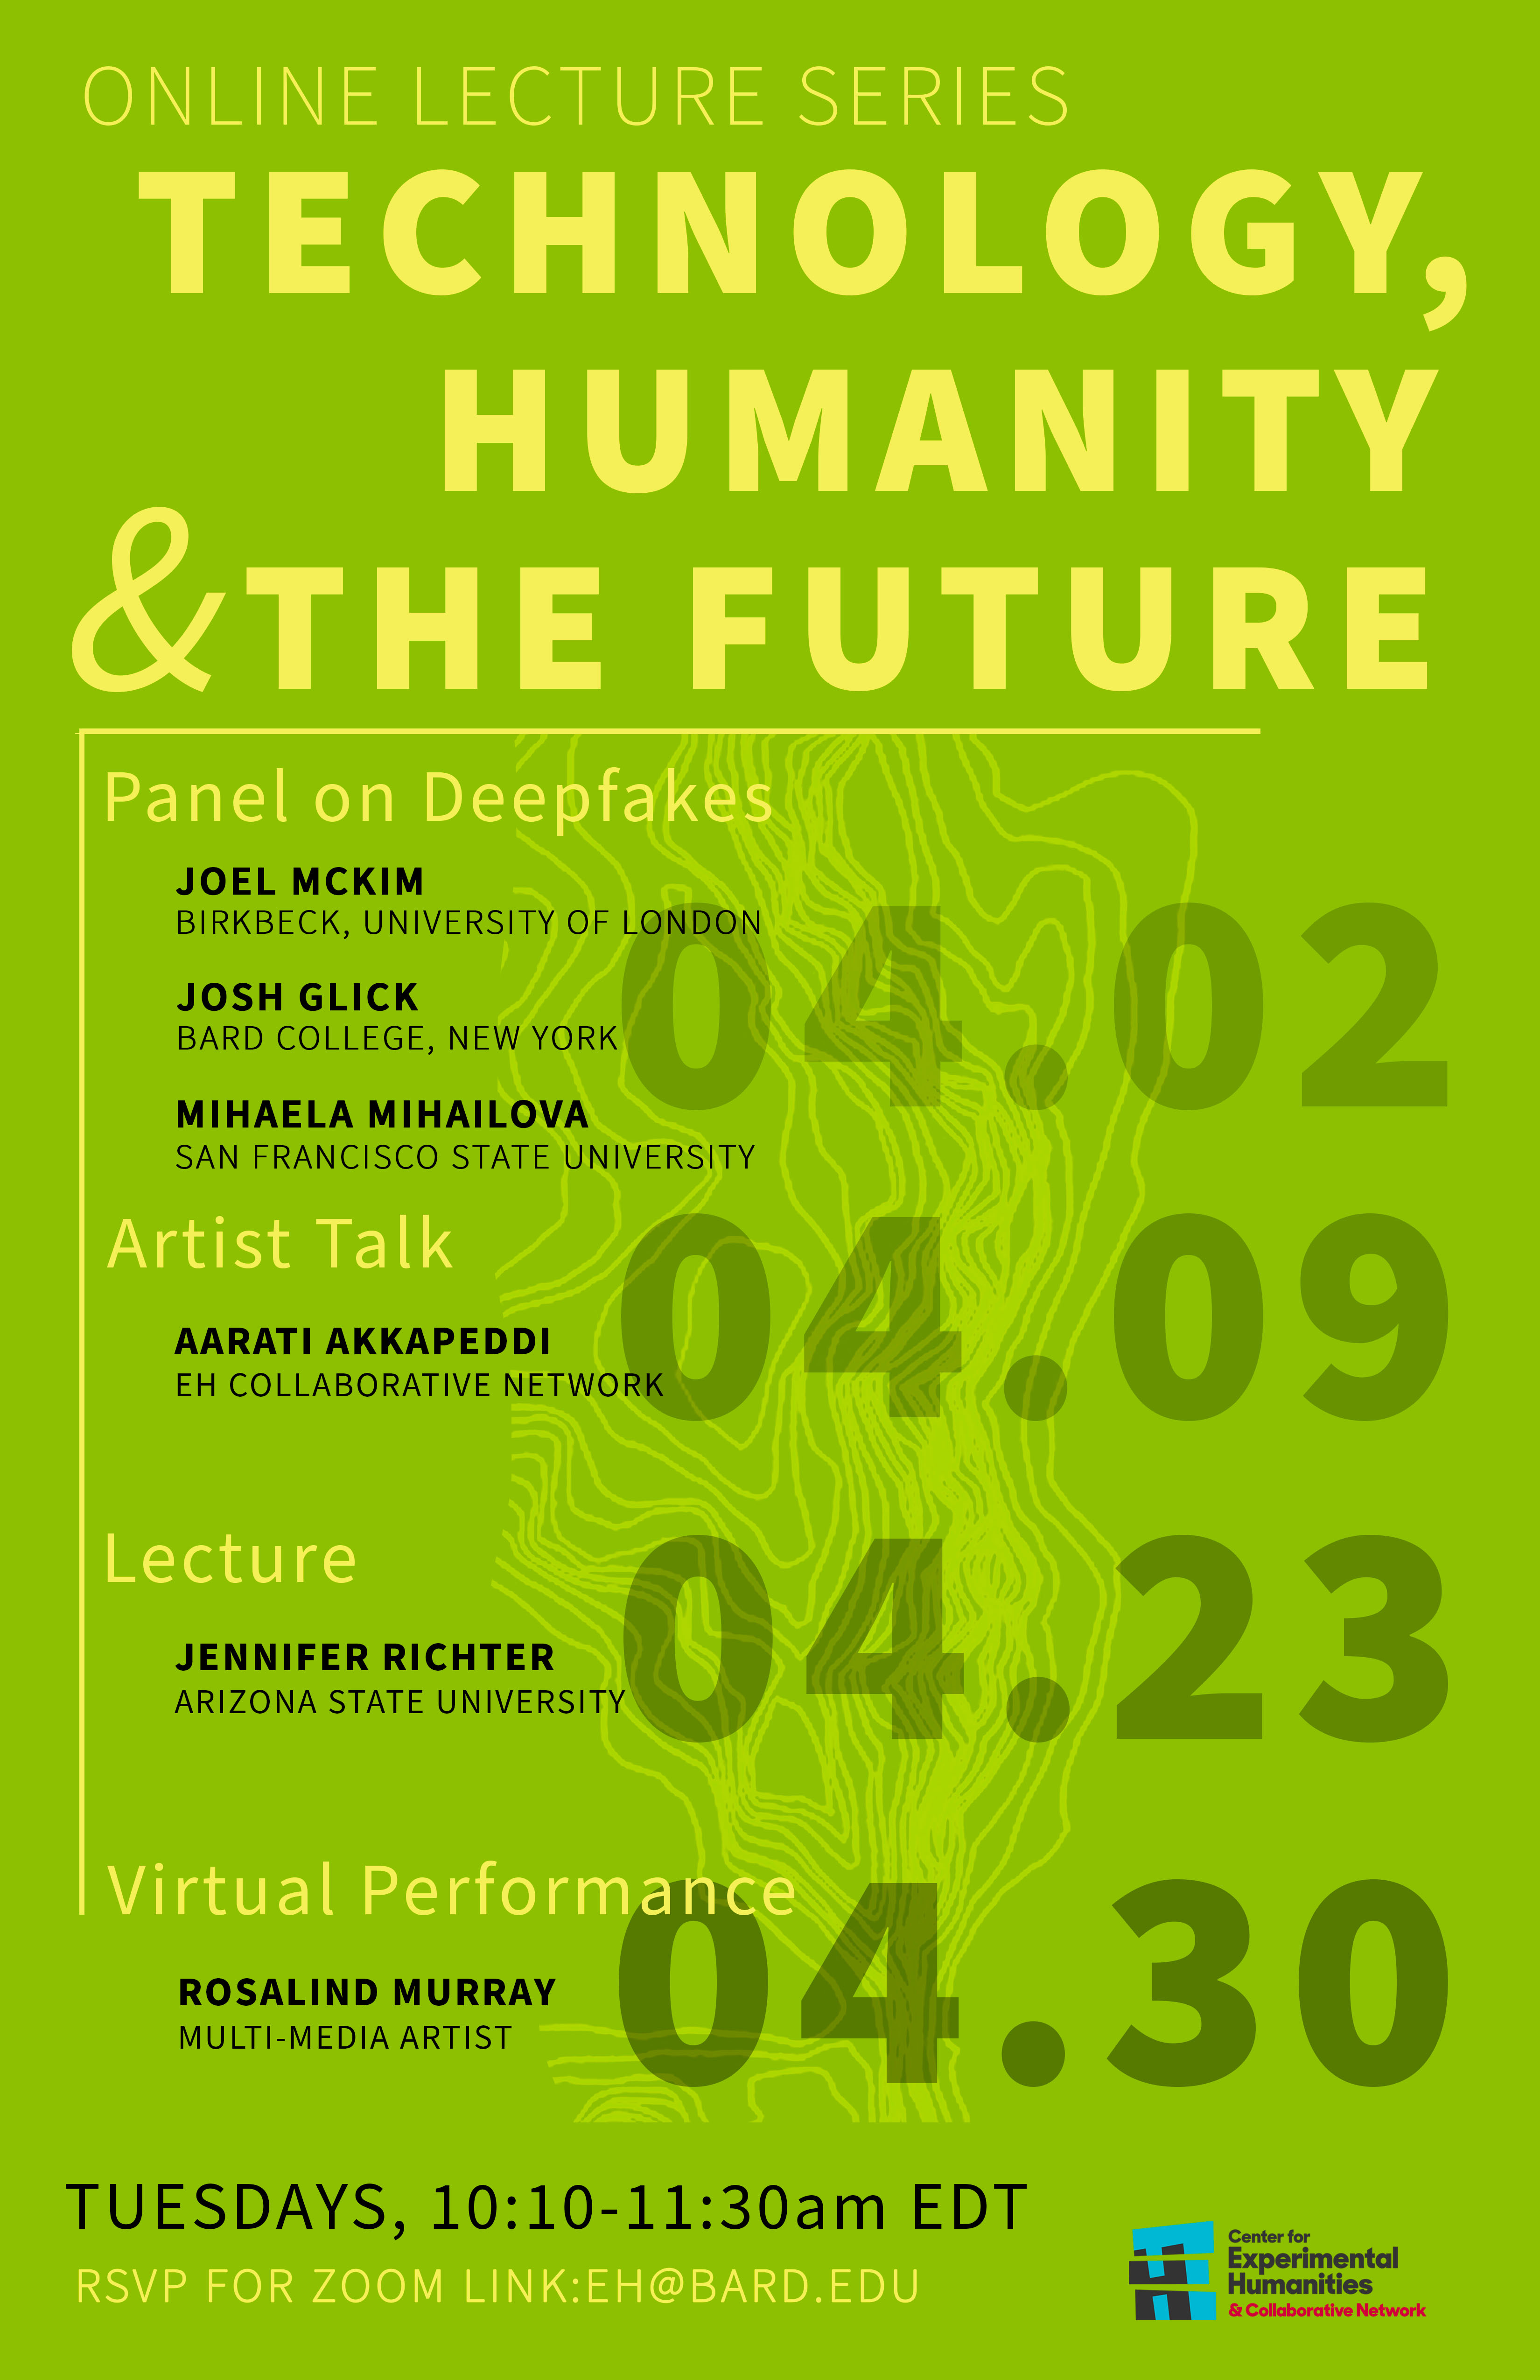 Visit https://opensocietyuniversitynetwork.org/events/technology-humanity-and-the-future